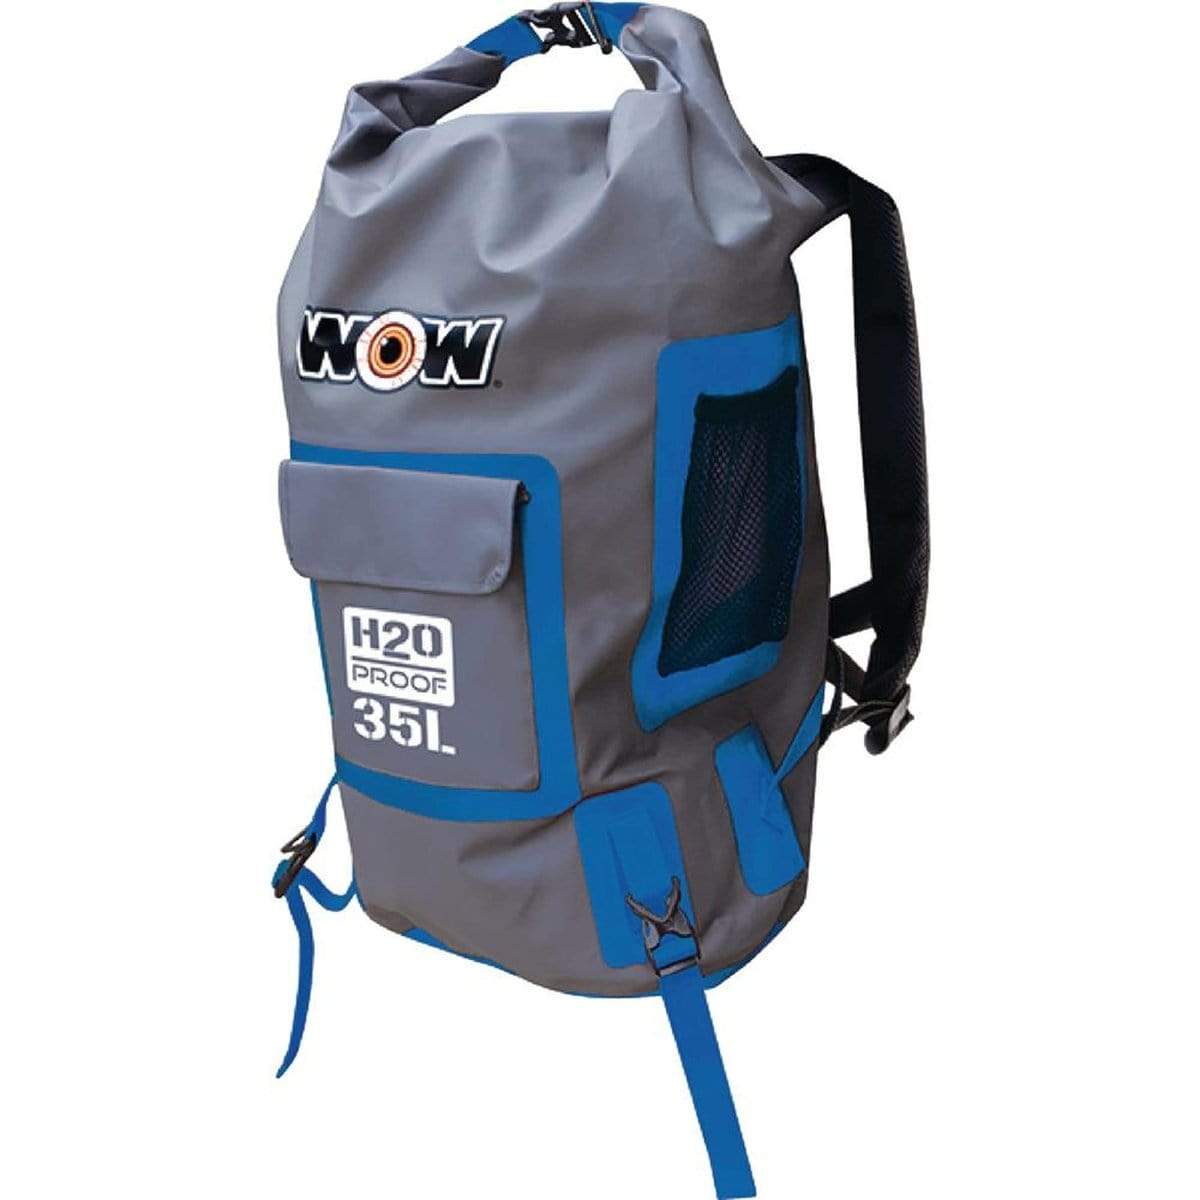 WOW World of Watersports Qualifies for Free Shipping WOW World of Watersports Backpack H2o Proof Dry Bag Blue #18-5110B